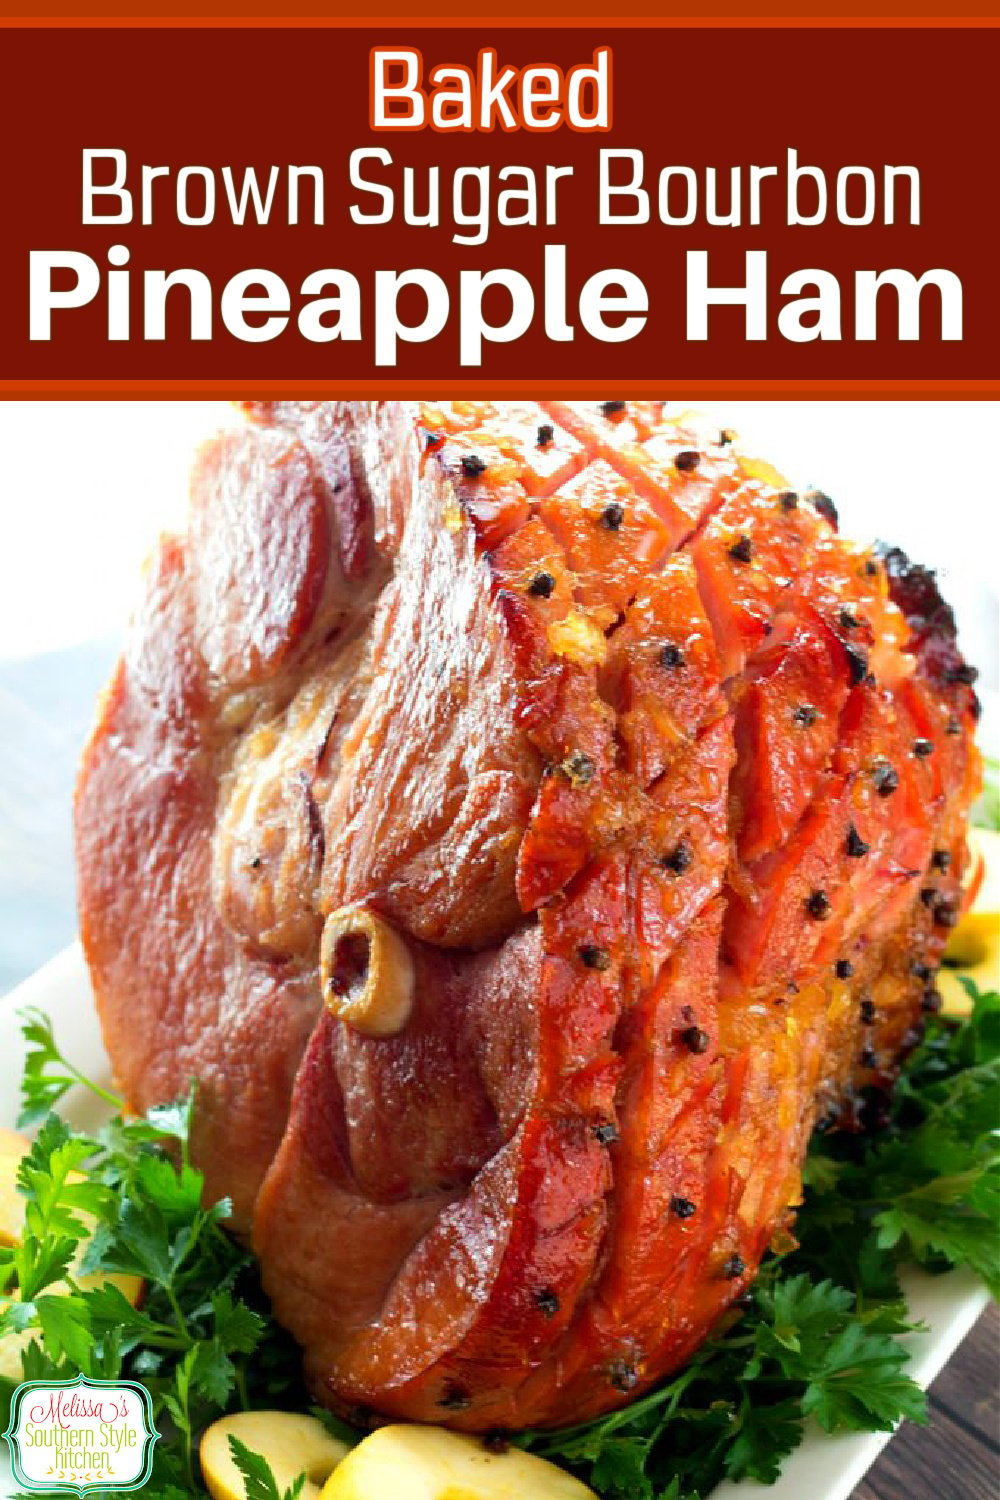 Brown Sugar Bourbon Pineapple Glazed Ham is the perfect centerpiece for your holiday table #brownsugarham #hamrecipes #southernham #bakedhamrecipes #brownsugarhamrecipe #borubonglazedham #easterrecipes #christmasrecipes #thanksgivingrecipes #glazedham #southernrecipes #southernfood #melissassouthernstylekitchen via @melissasssk